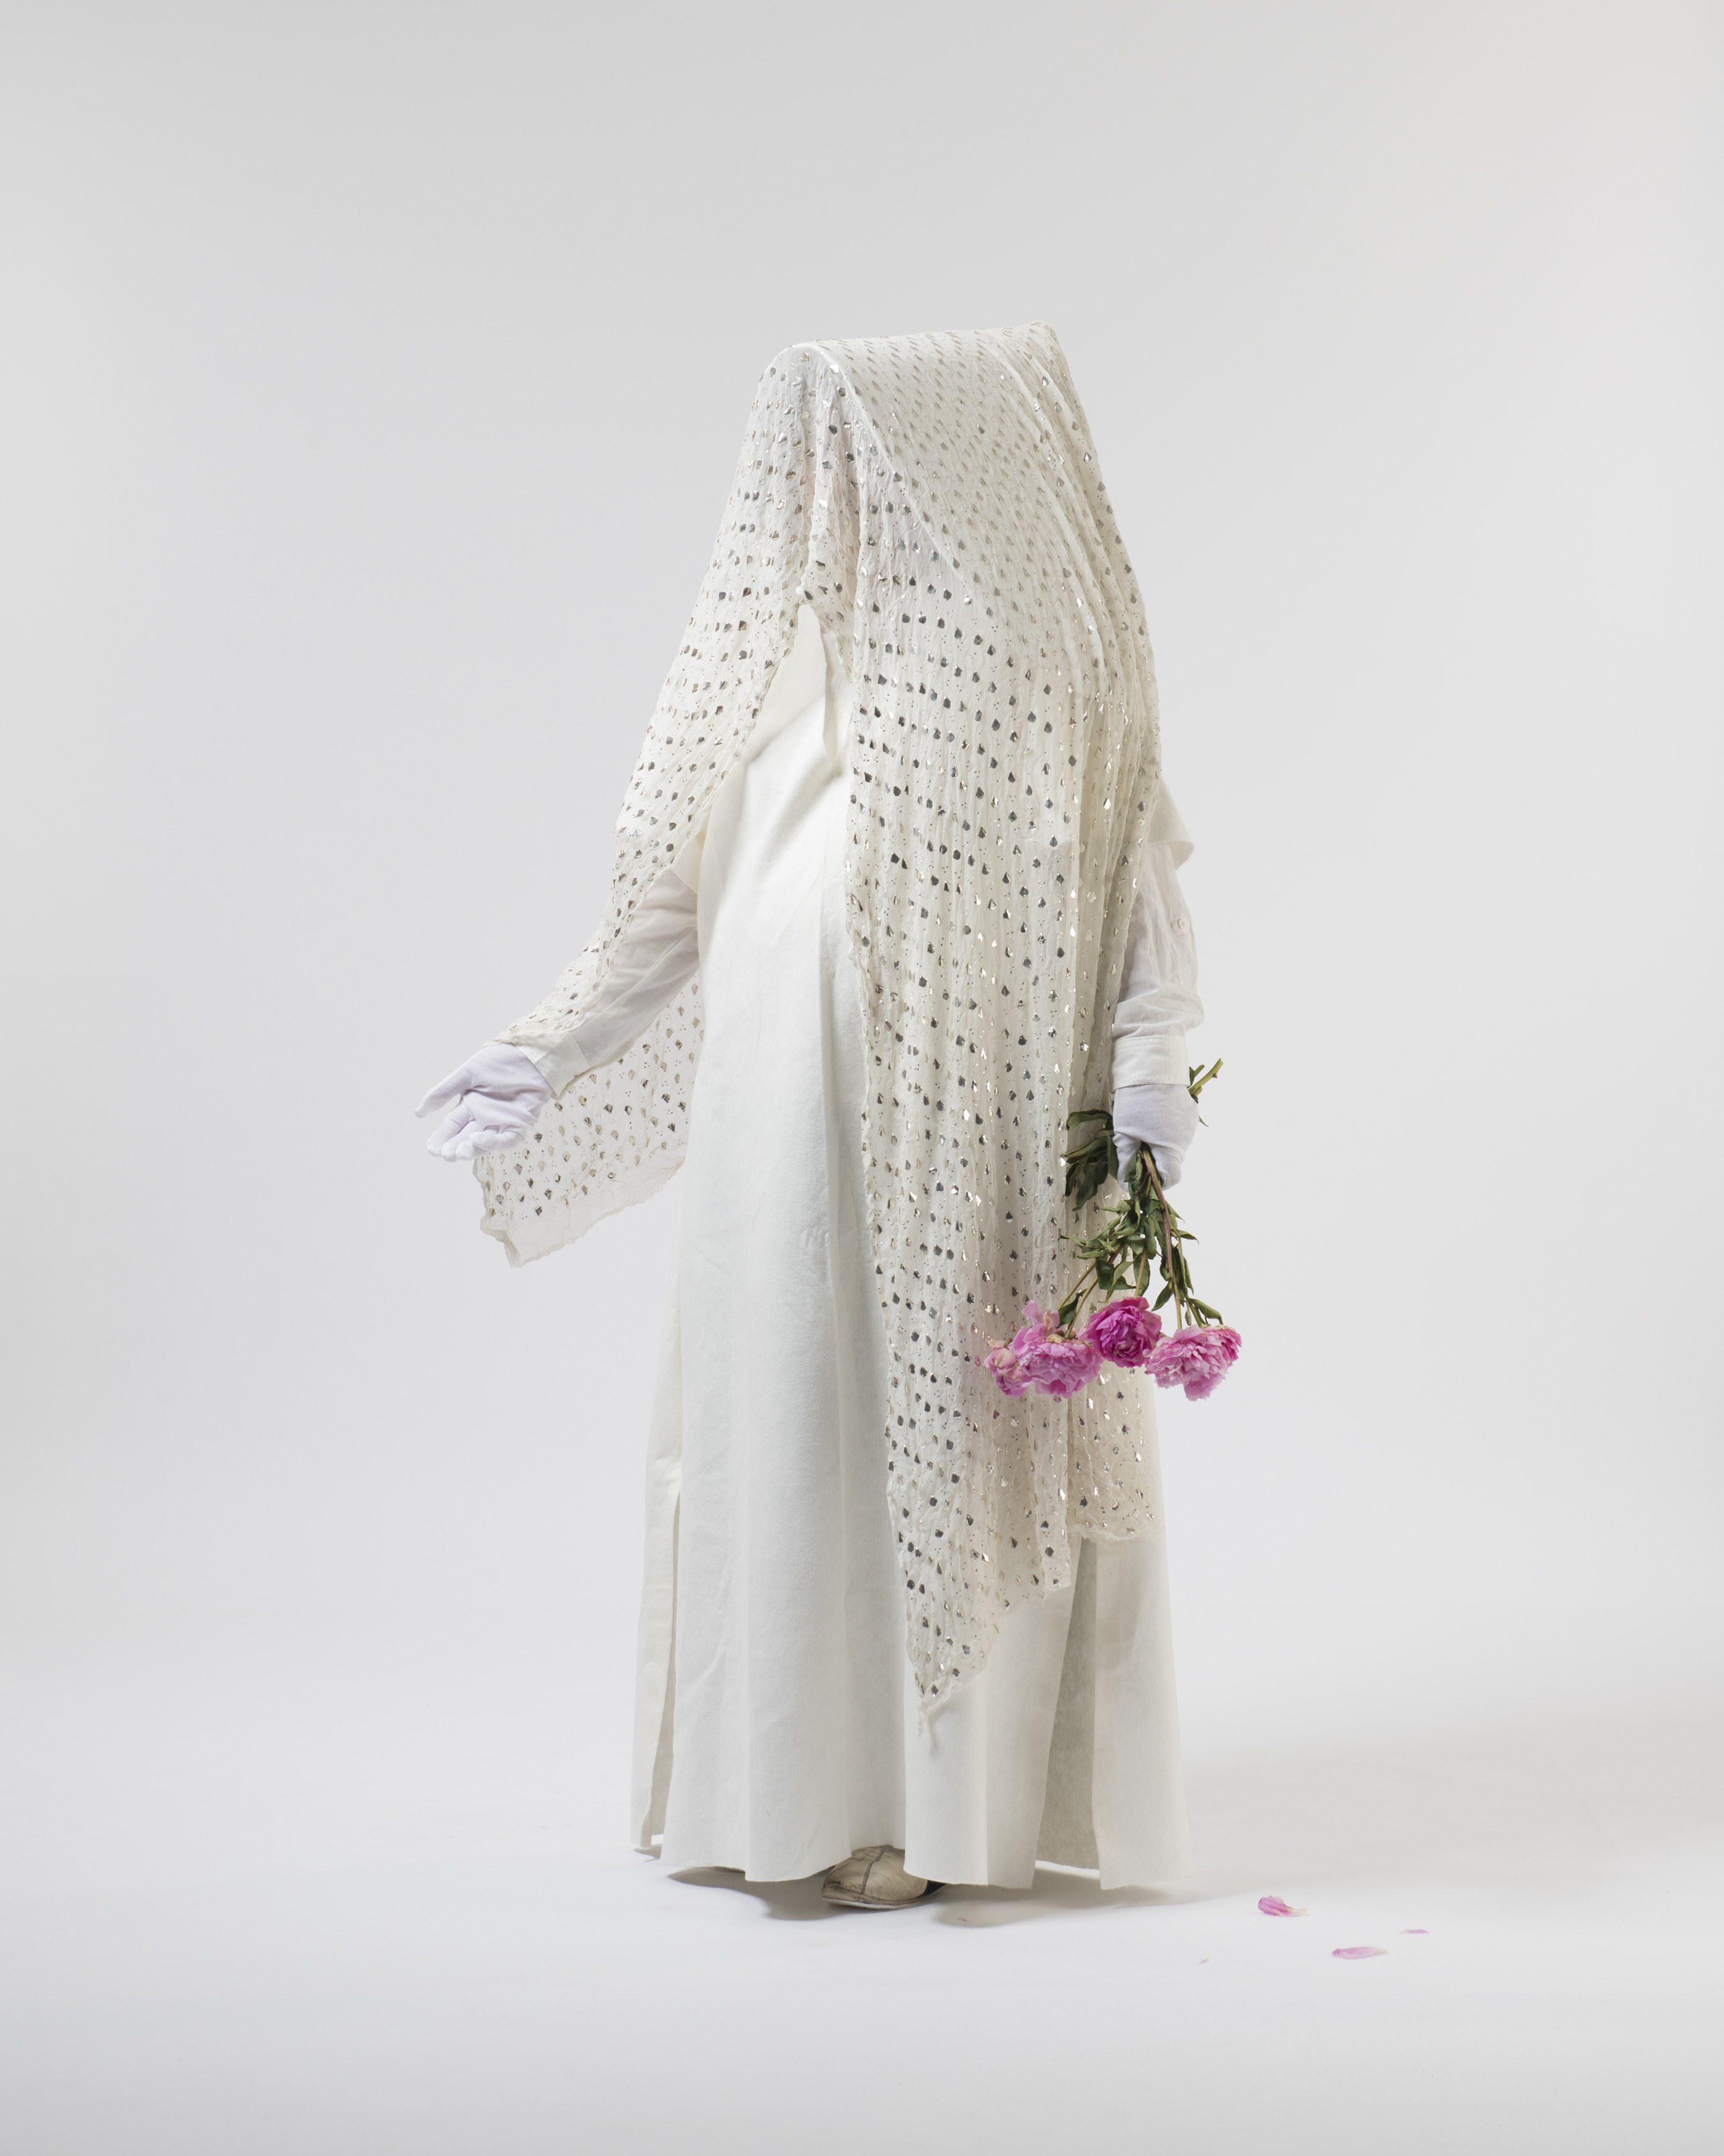 A costumed person against a plain background. The costume is all white, including a dress, gloves and shoes. Over their head is a white scarf with metallic details. They hold a bunch of pink flowers in one hand. 